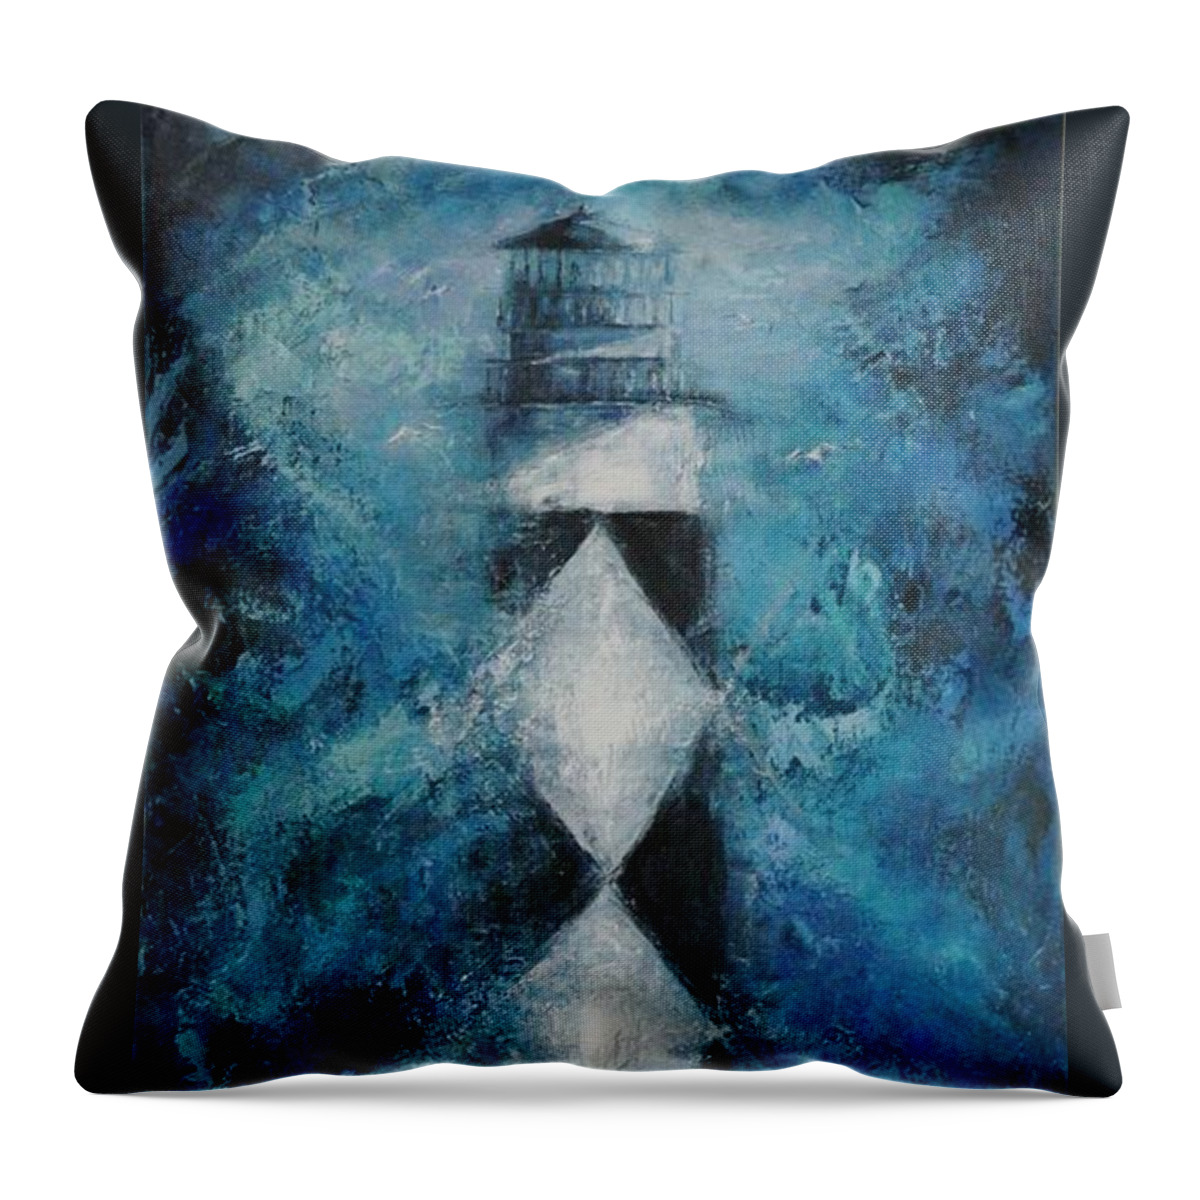 Cape Lookout Throw Pillow featuring the painting Lookout by Dan Campbell